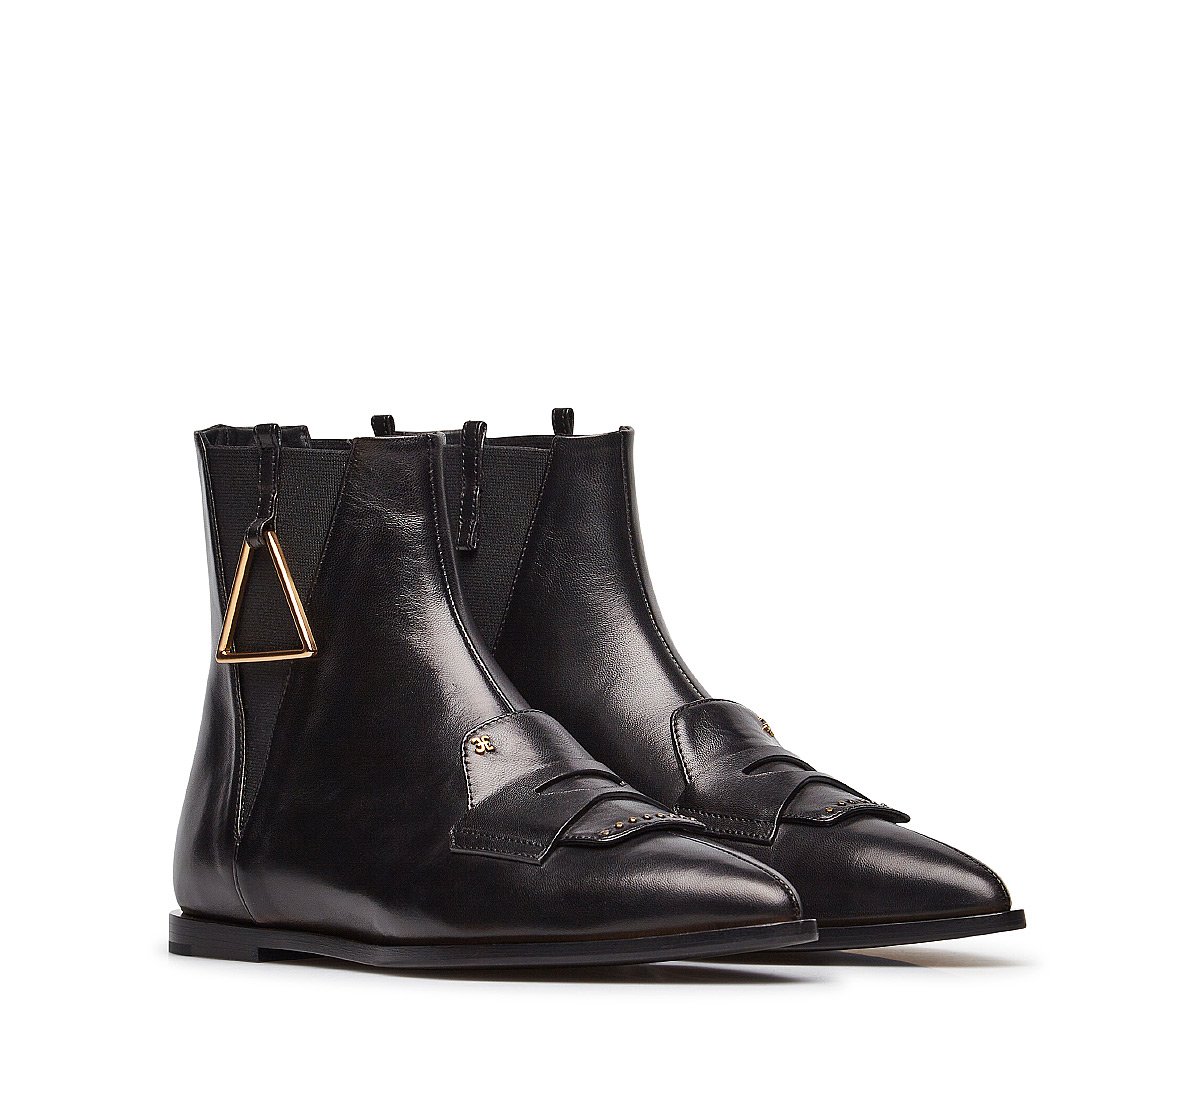 Fine nappa leather Beatle boots